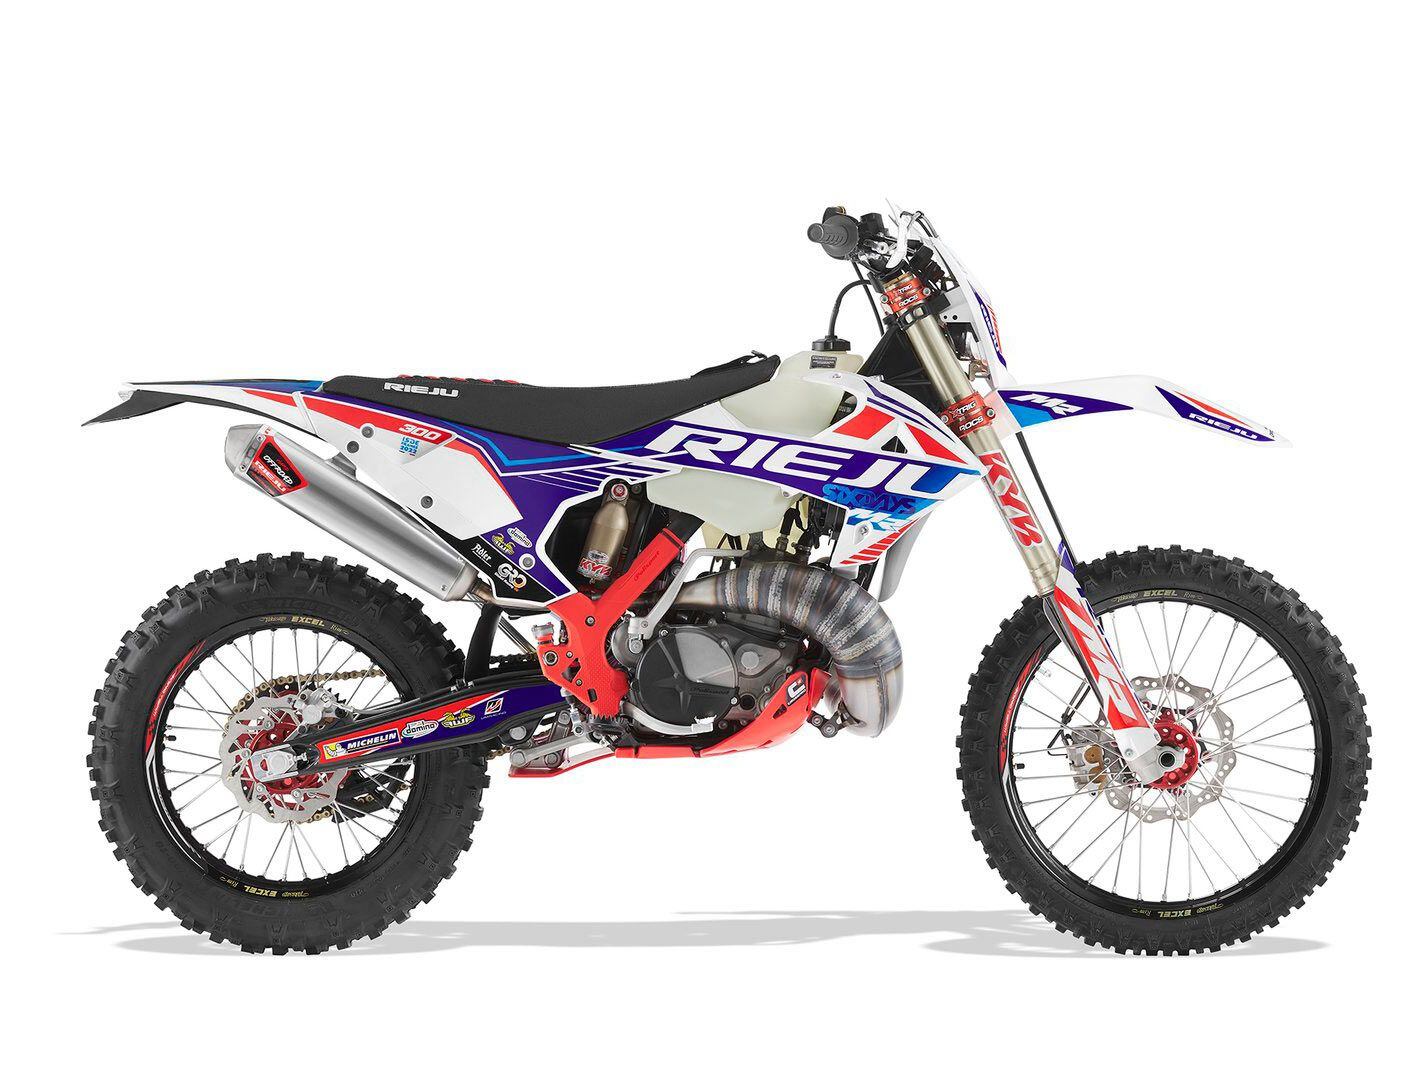 The MR Six Days 300 takes the biggest MR Pro model and gives it the ISDE treatment. This year it nods to the 2022 French ISDE, next it will presumably be inspired by the Argentinian ISDE of 2024.